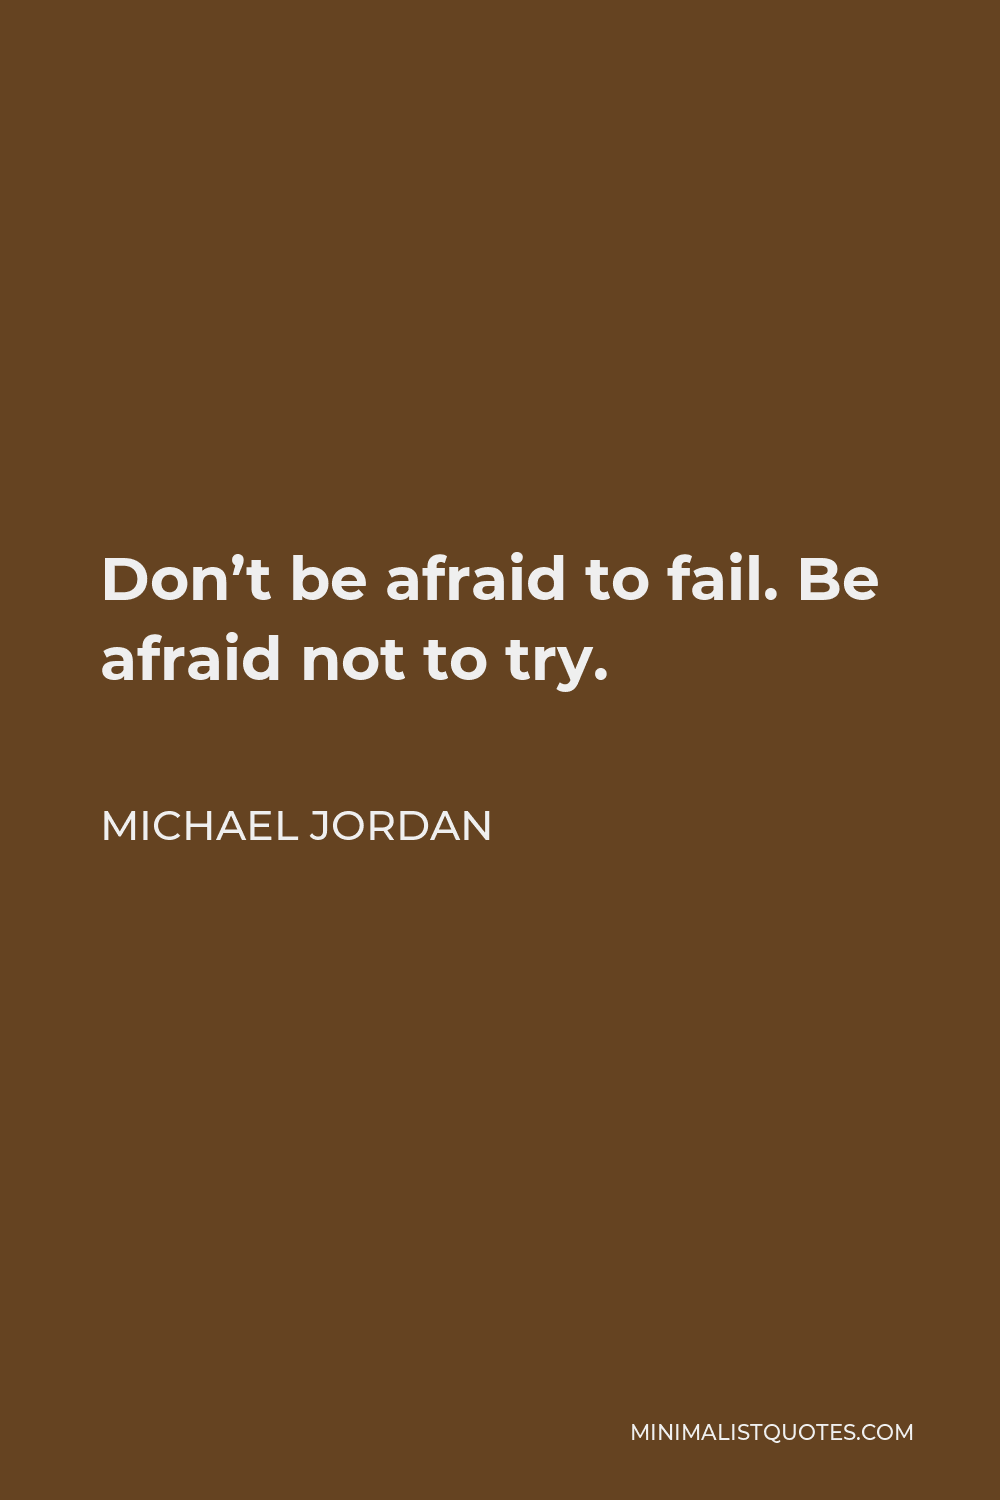 Michael Jordan Quote - Don’t be afraid to fail. Be afraid not to try.